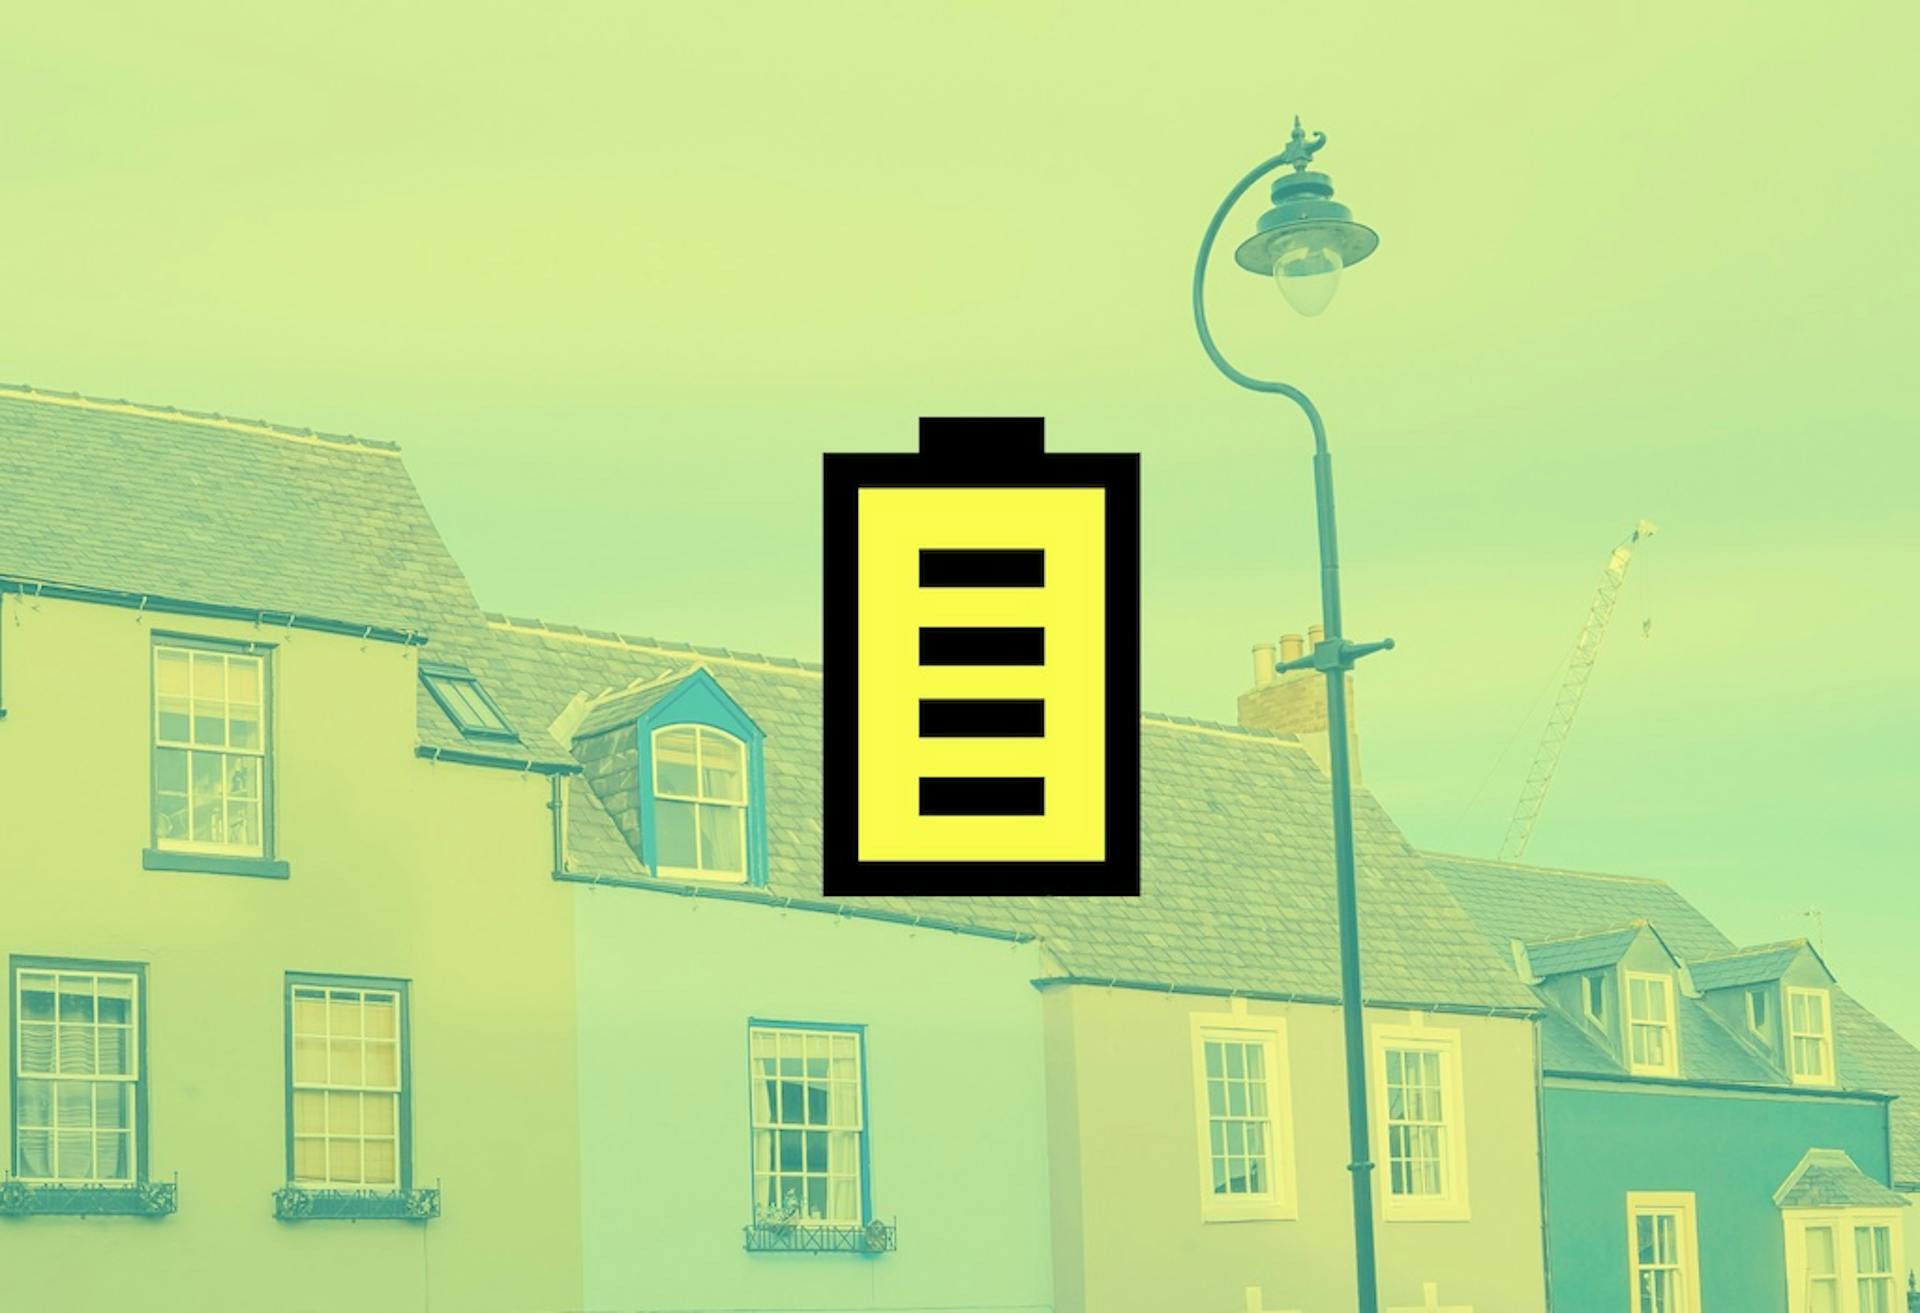 A row of terraced houses in the UK, a yellow filter on top, and a cartoon yellow storage battery in the centre